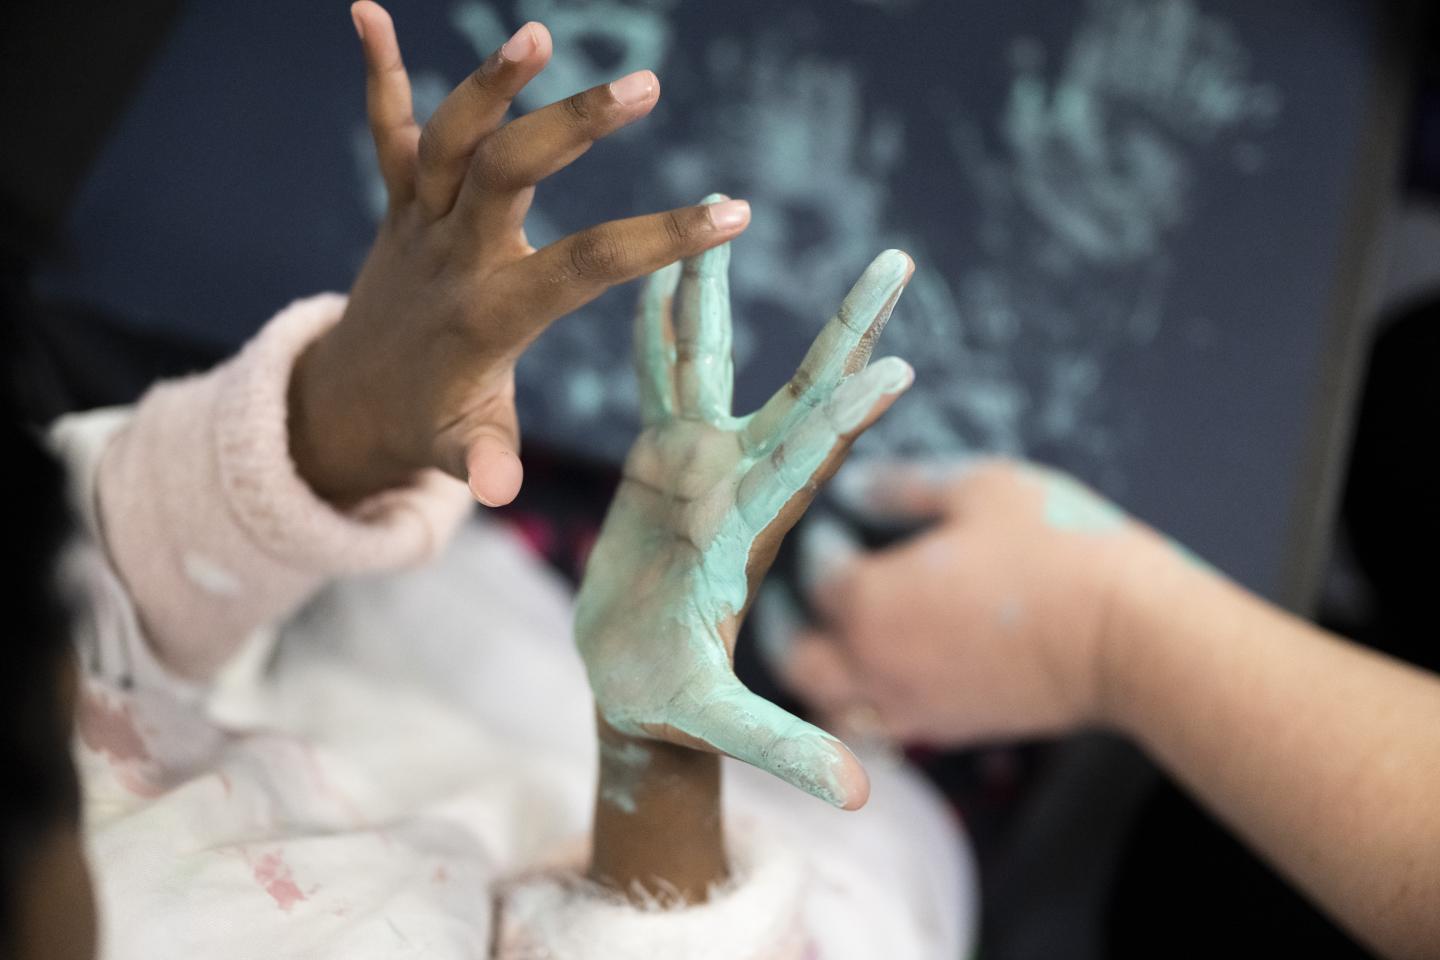 A child's hands photographed during an art workshop. The palm of their right hand is covered in light green paint, and they are feeling the wet paint with their left hand. In the background, a piece of paper with green handprints is just visible